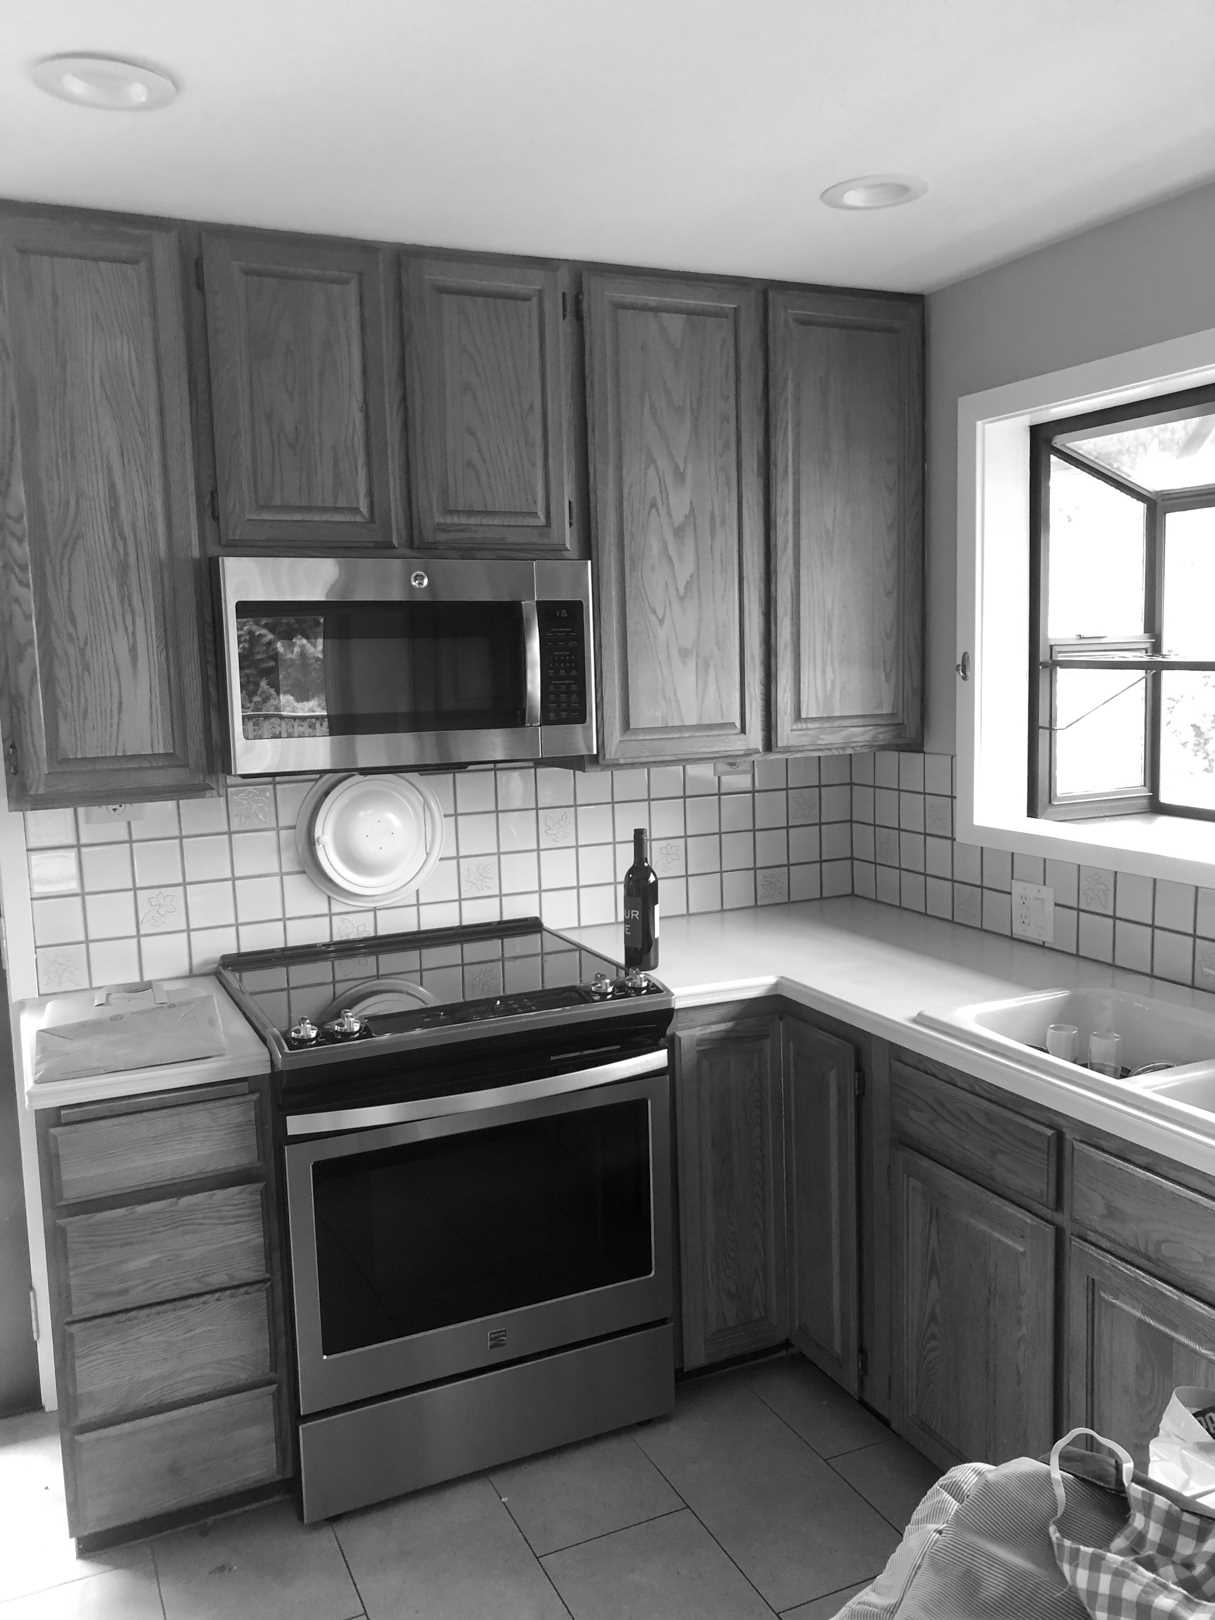 Before - The original kitchen was closed off and featured dated wood cabinets.